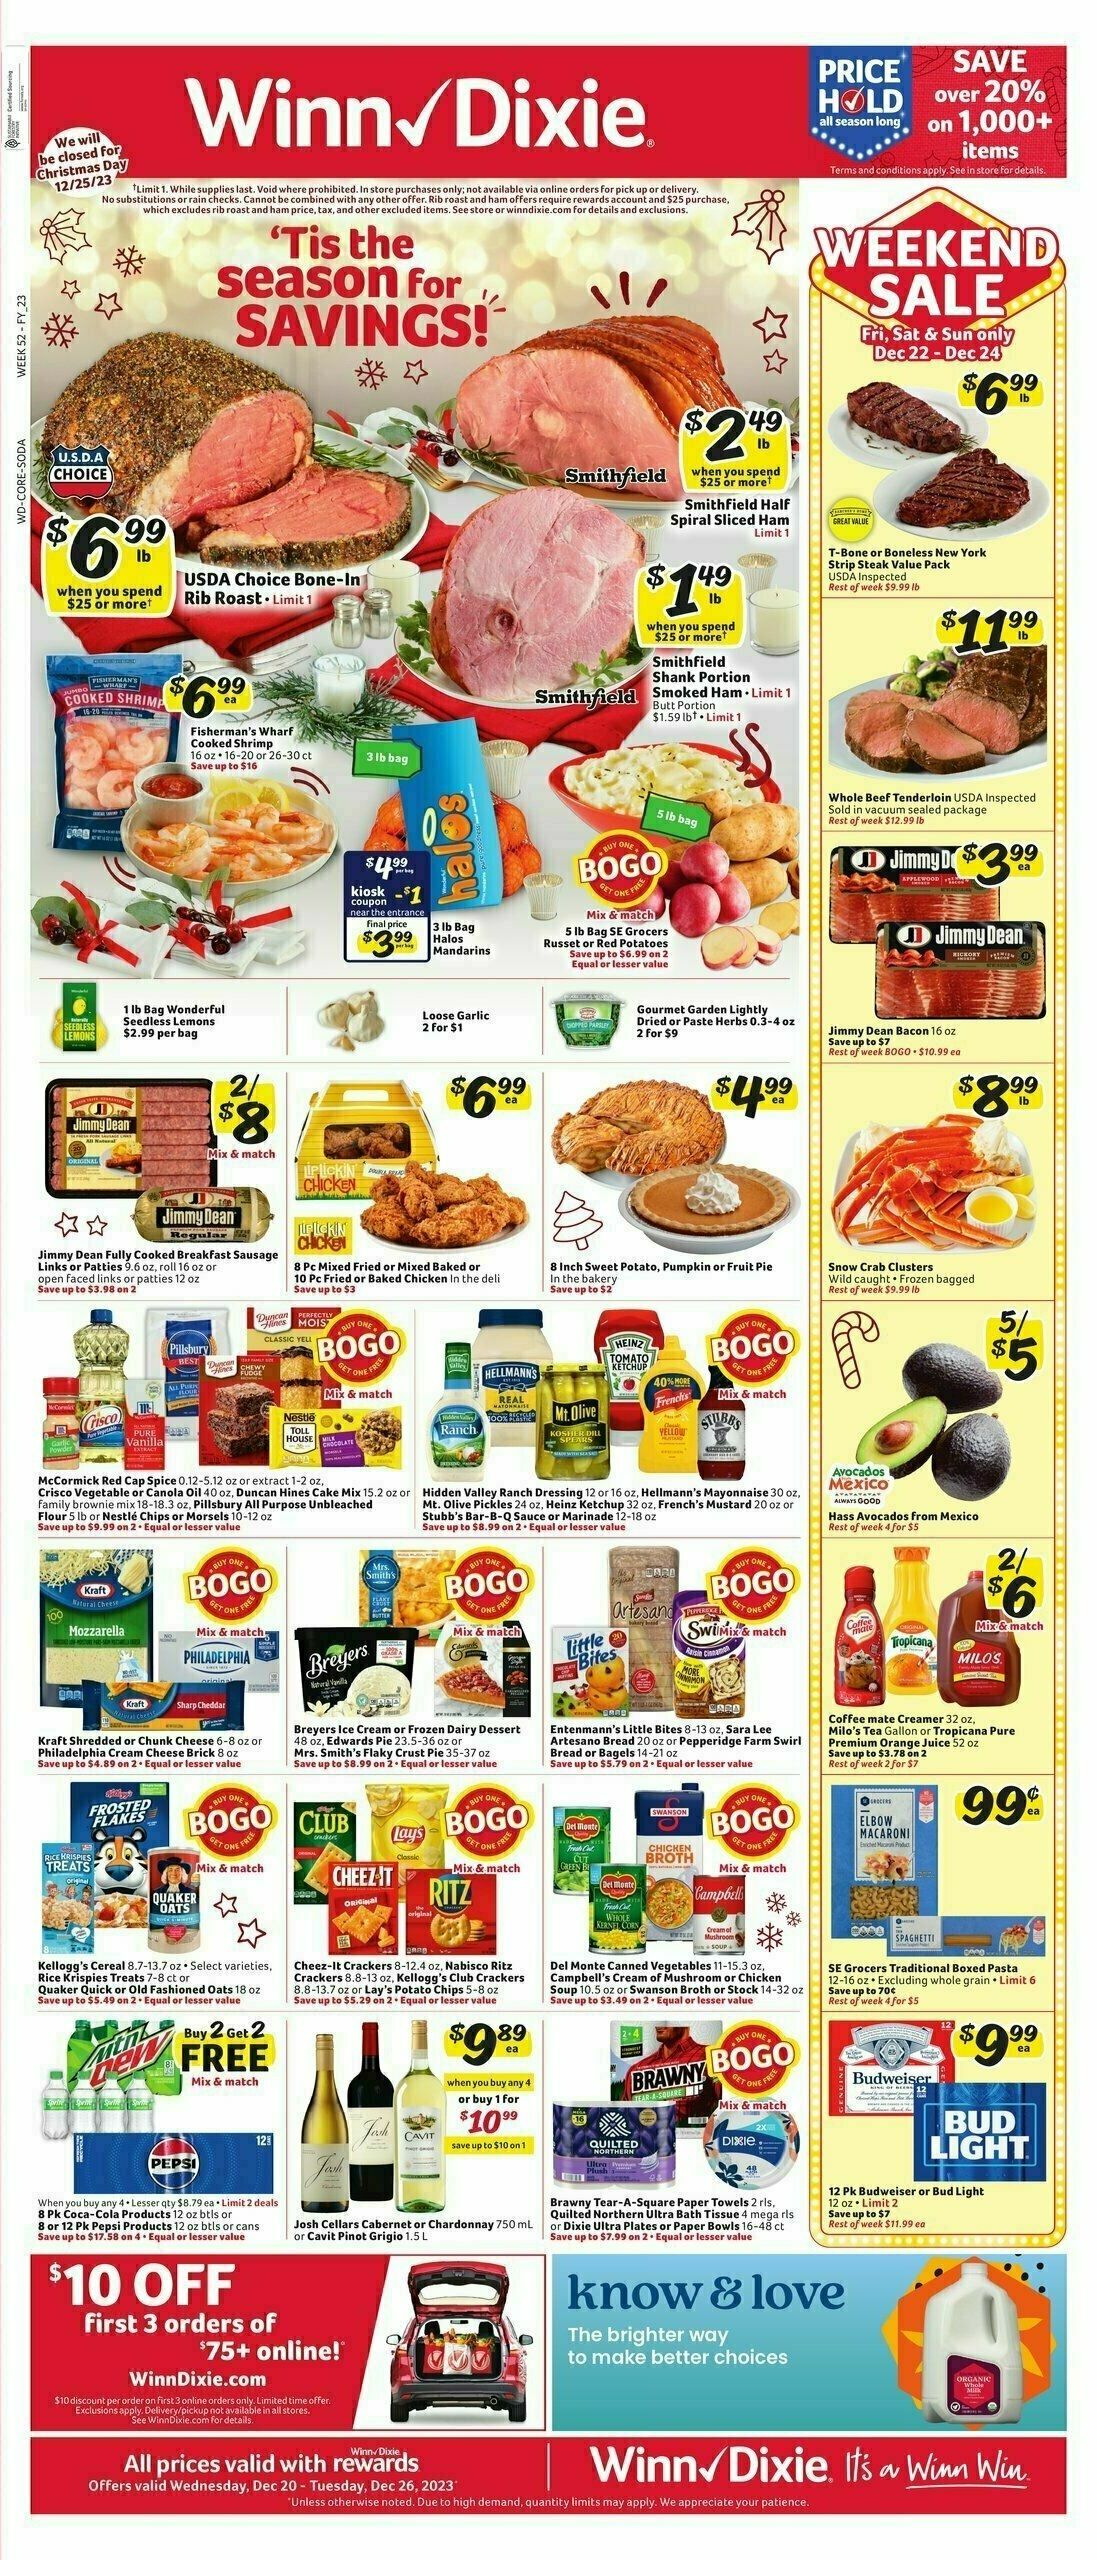 Winn-Dixie Weekly Ad from December 20